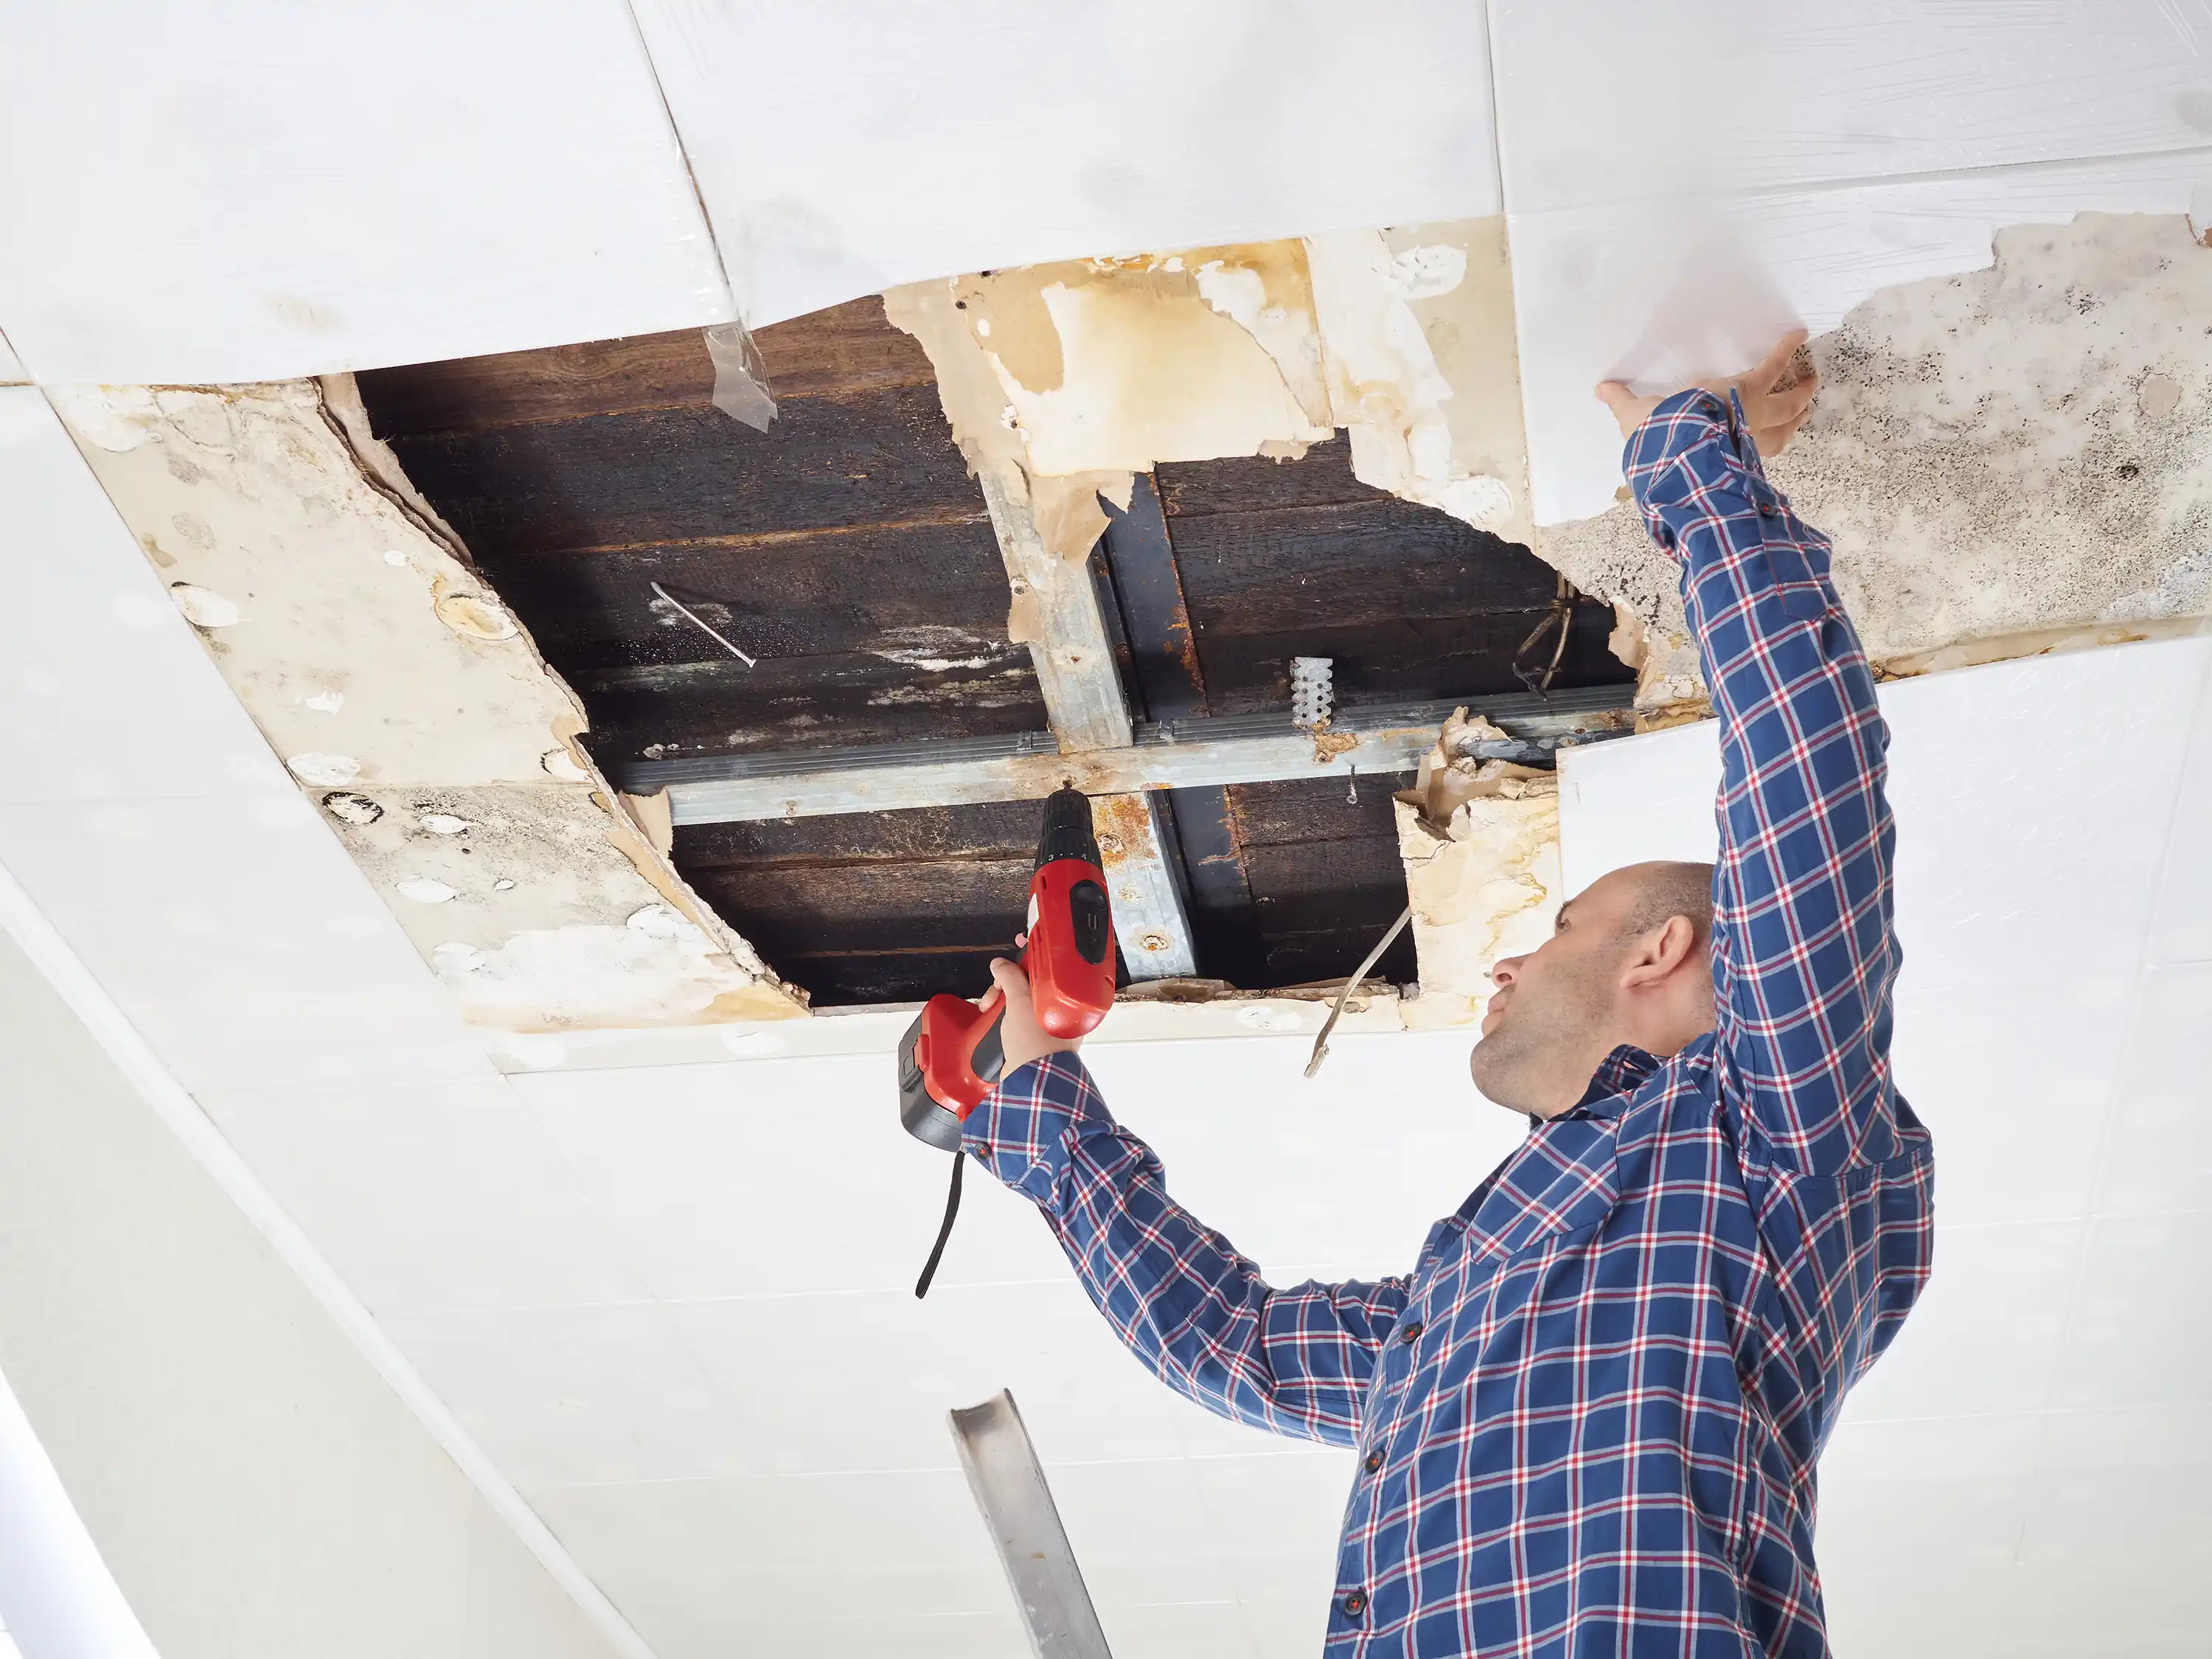 Water Damage Repair Costs: How Much Will You Have to Spend?